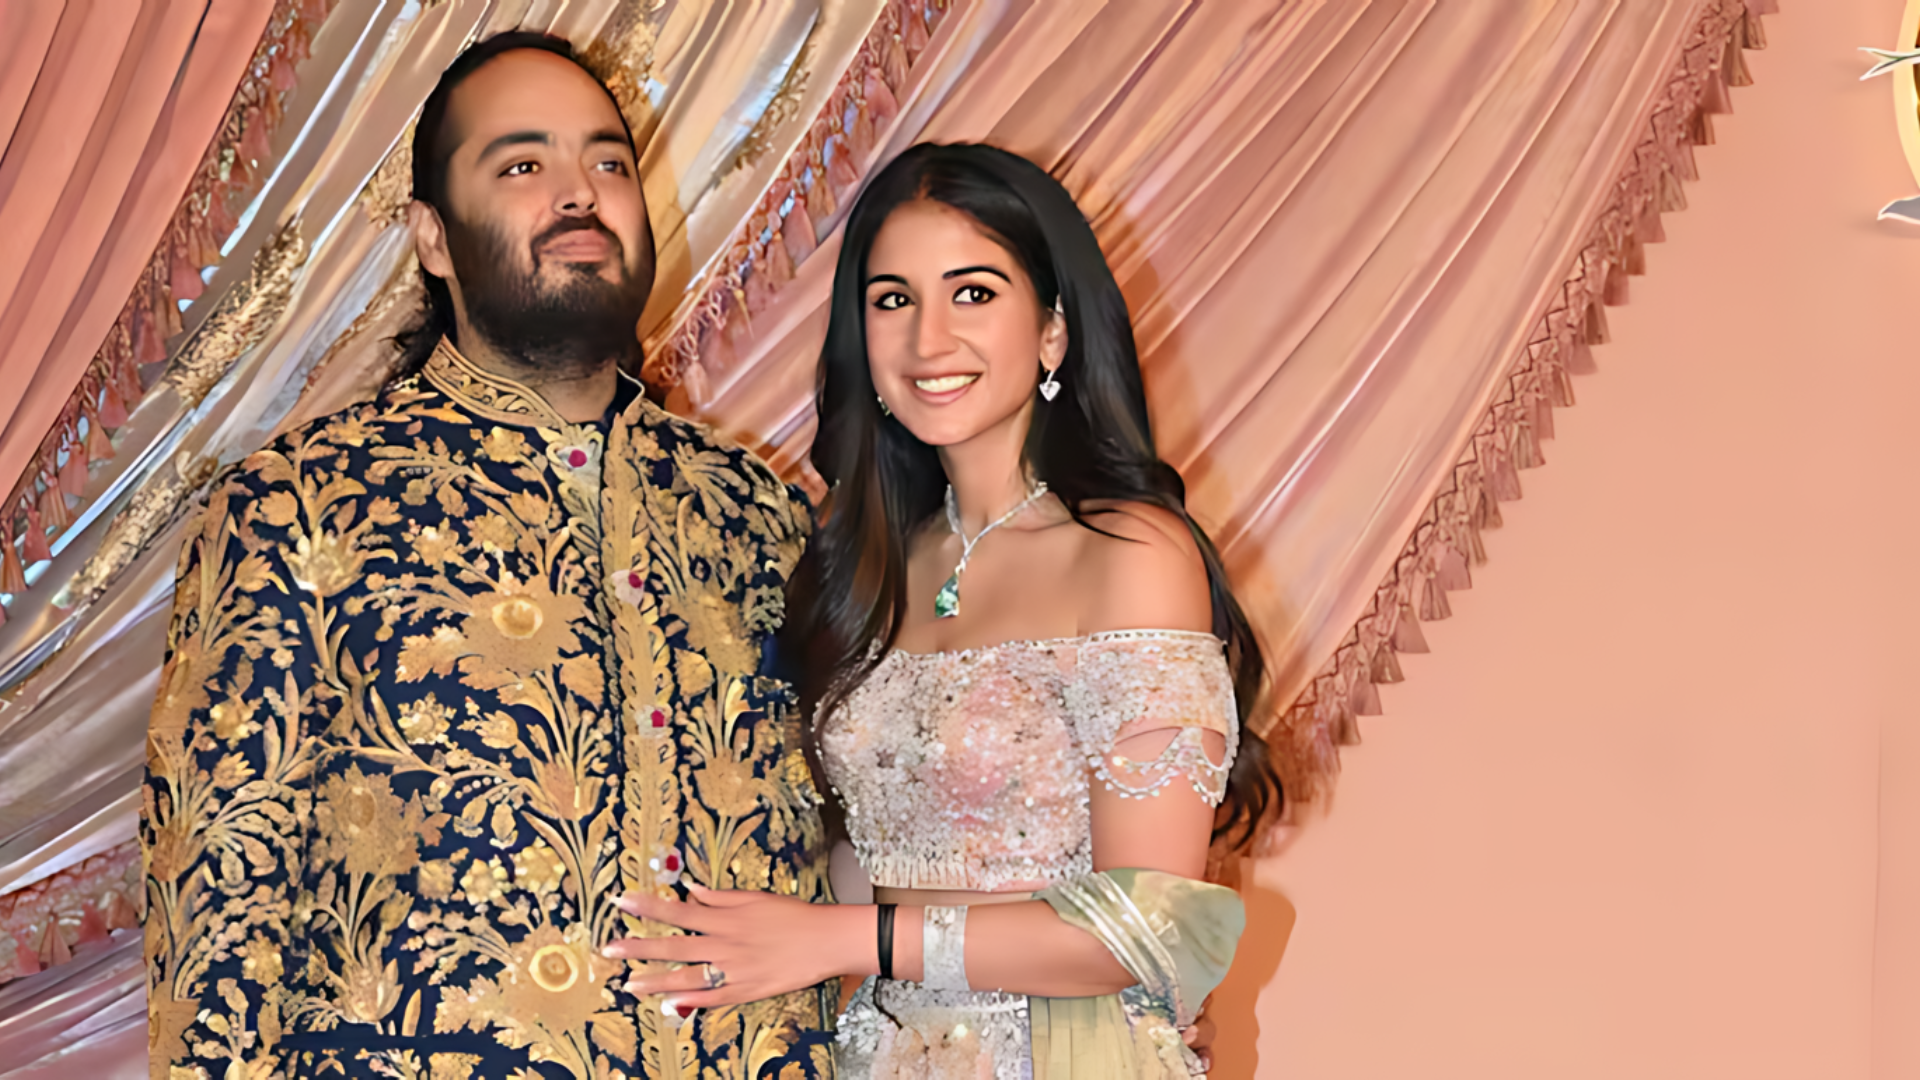 Anant Ambani Outfit For Sangeet Ceremony Had Real Gold, Radhika Merchant Opted For A Custom Dress With Swarovski Crystals